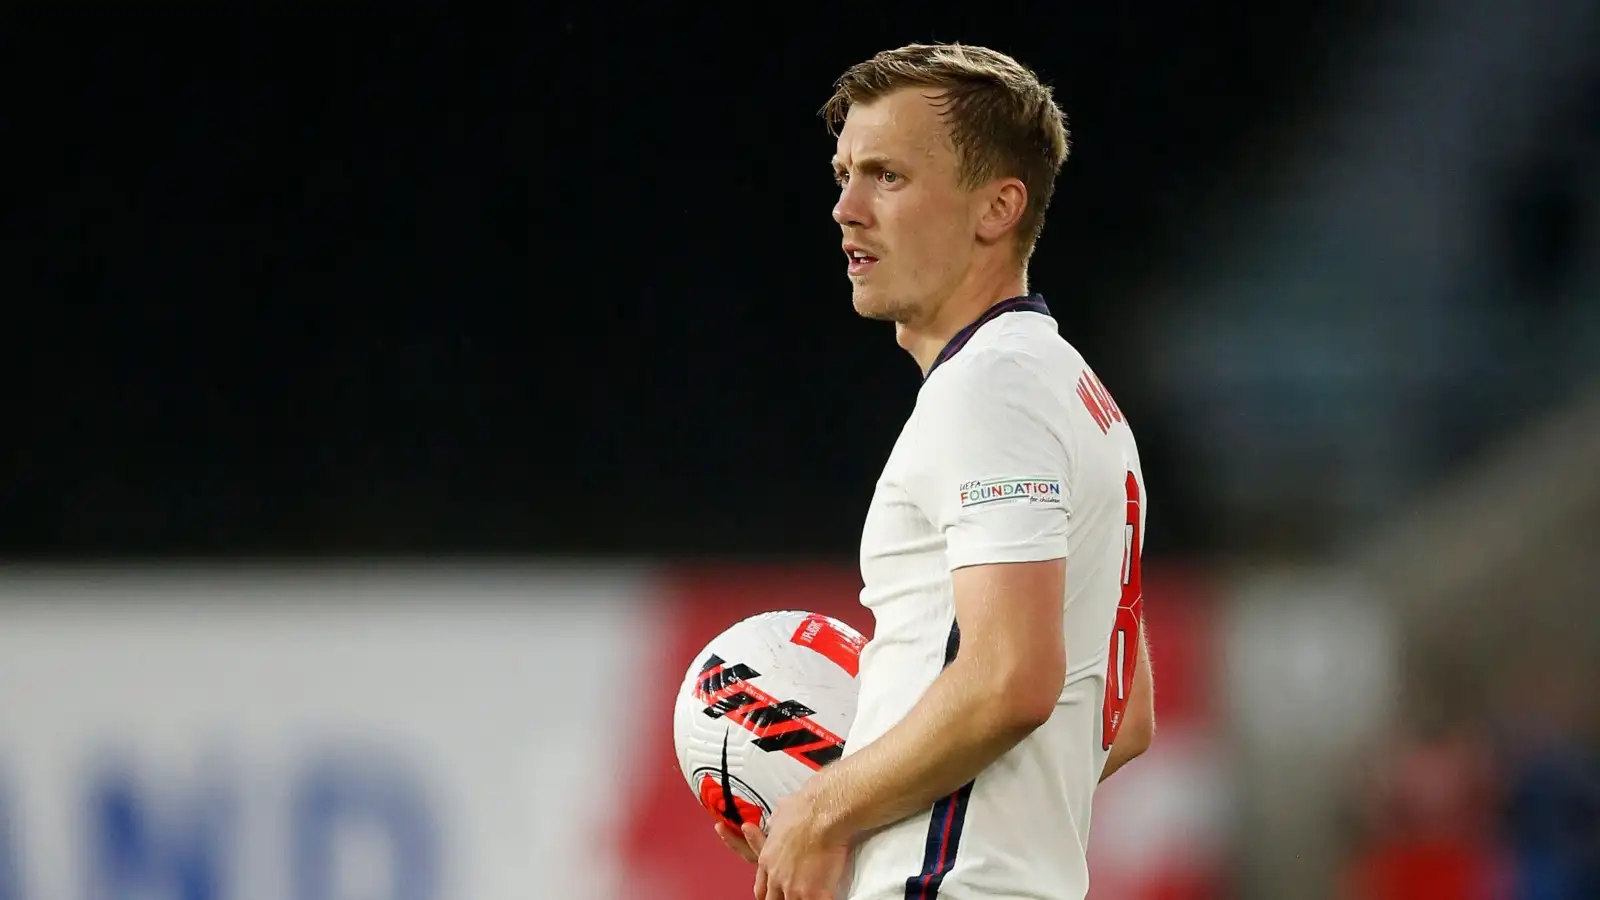 Arsenal-linked James Ward-Prowse holds the ball during a match